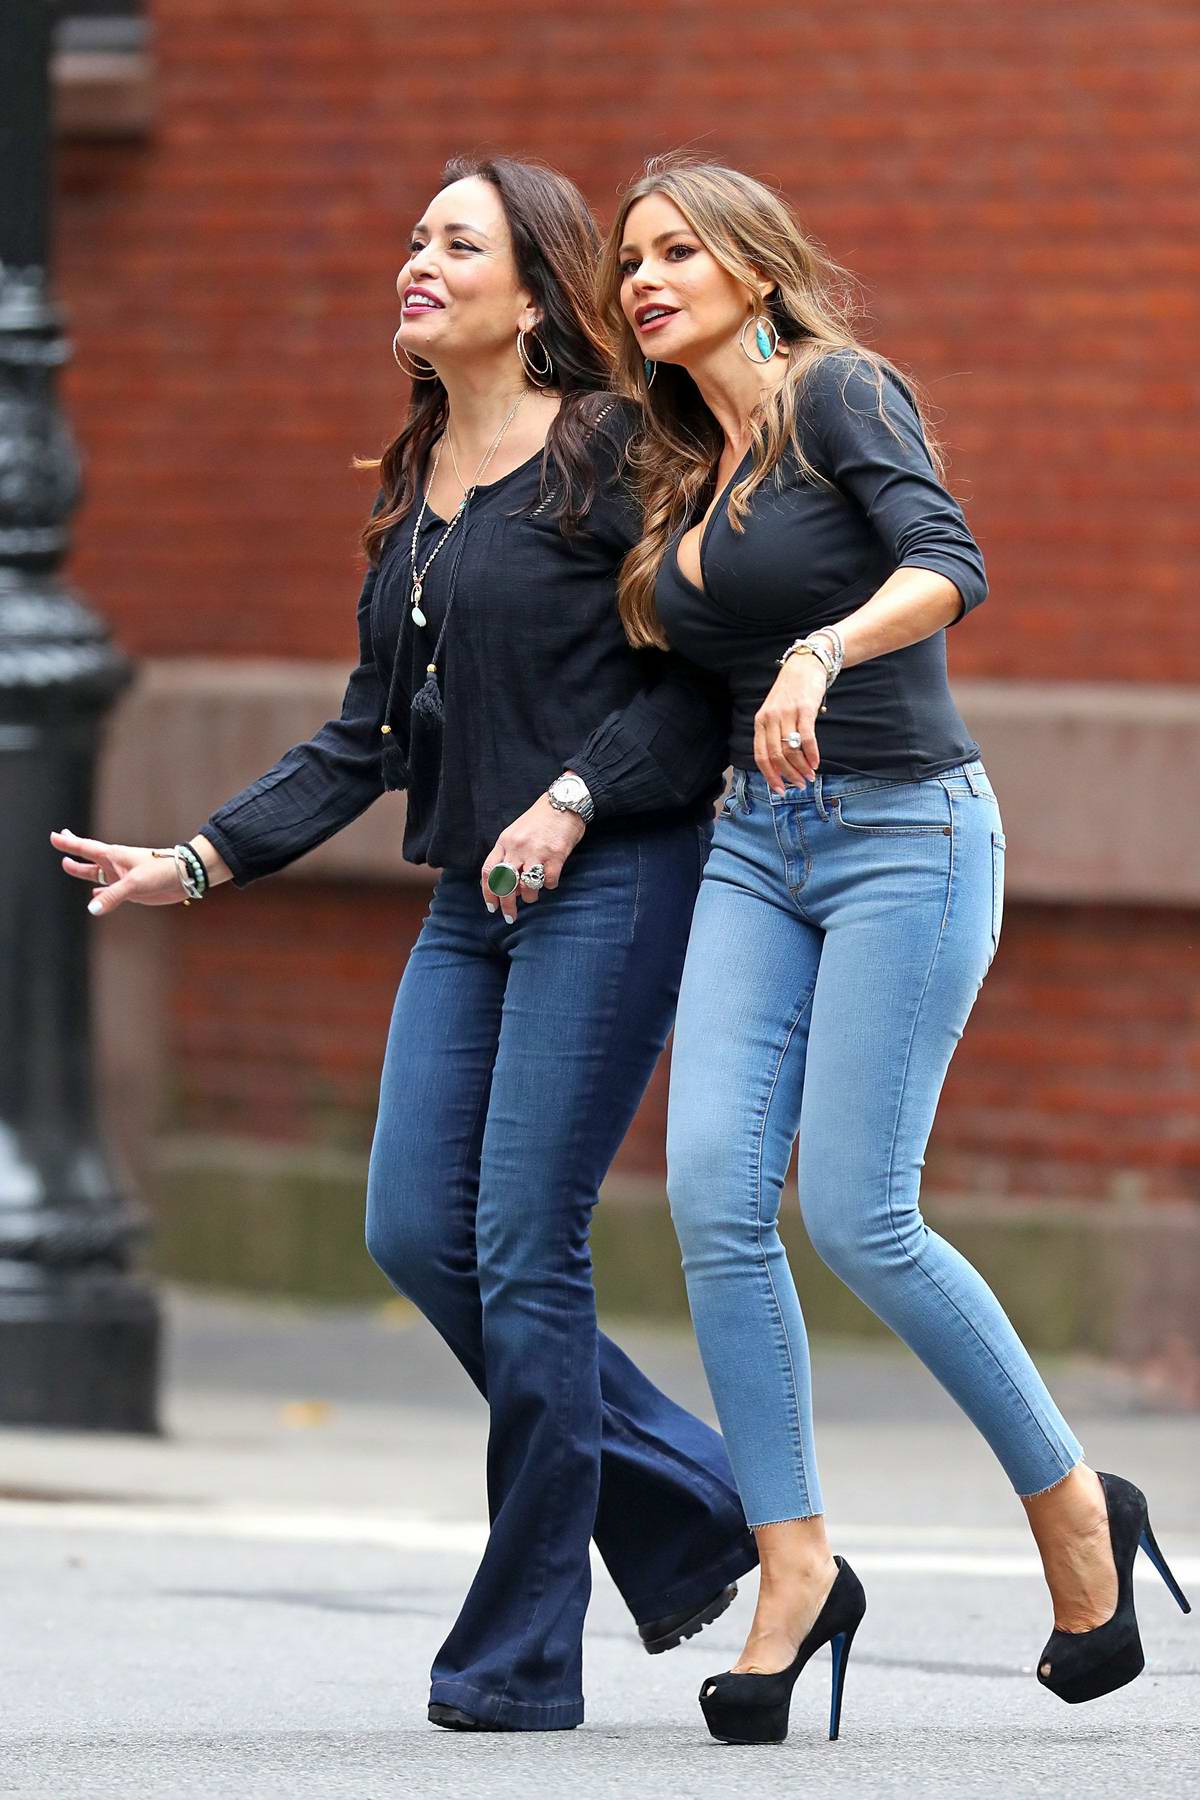 sofia vergara seen wearing a formfitting top, skinny jeans with platform heels  while directing a photoshoot in new york city-261018_5